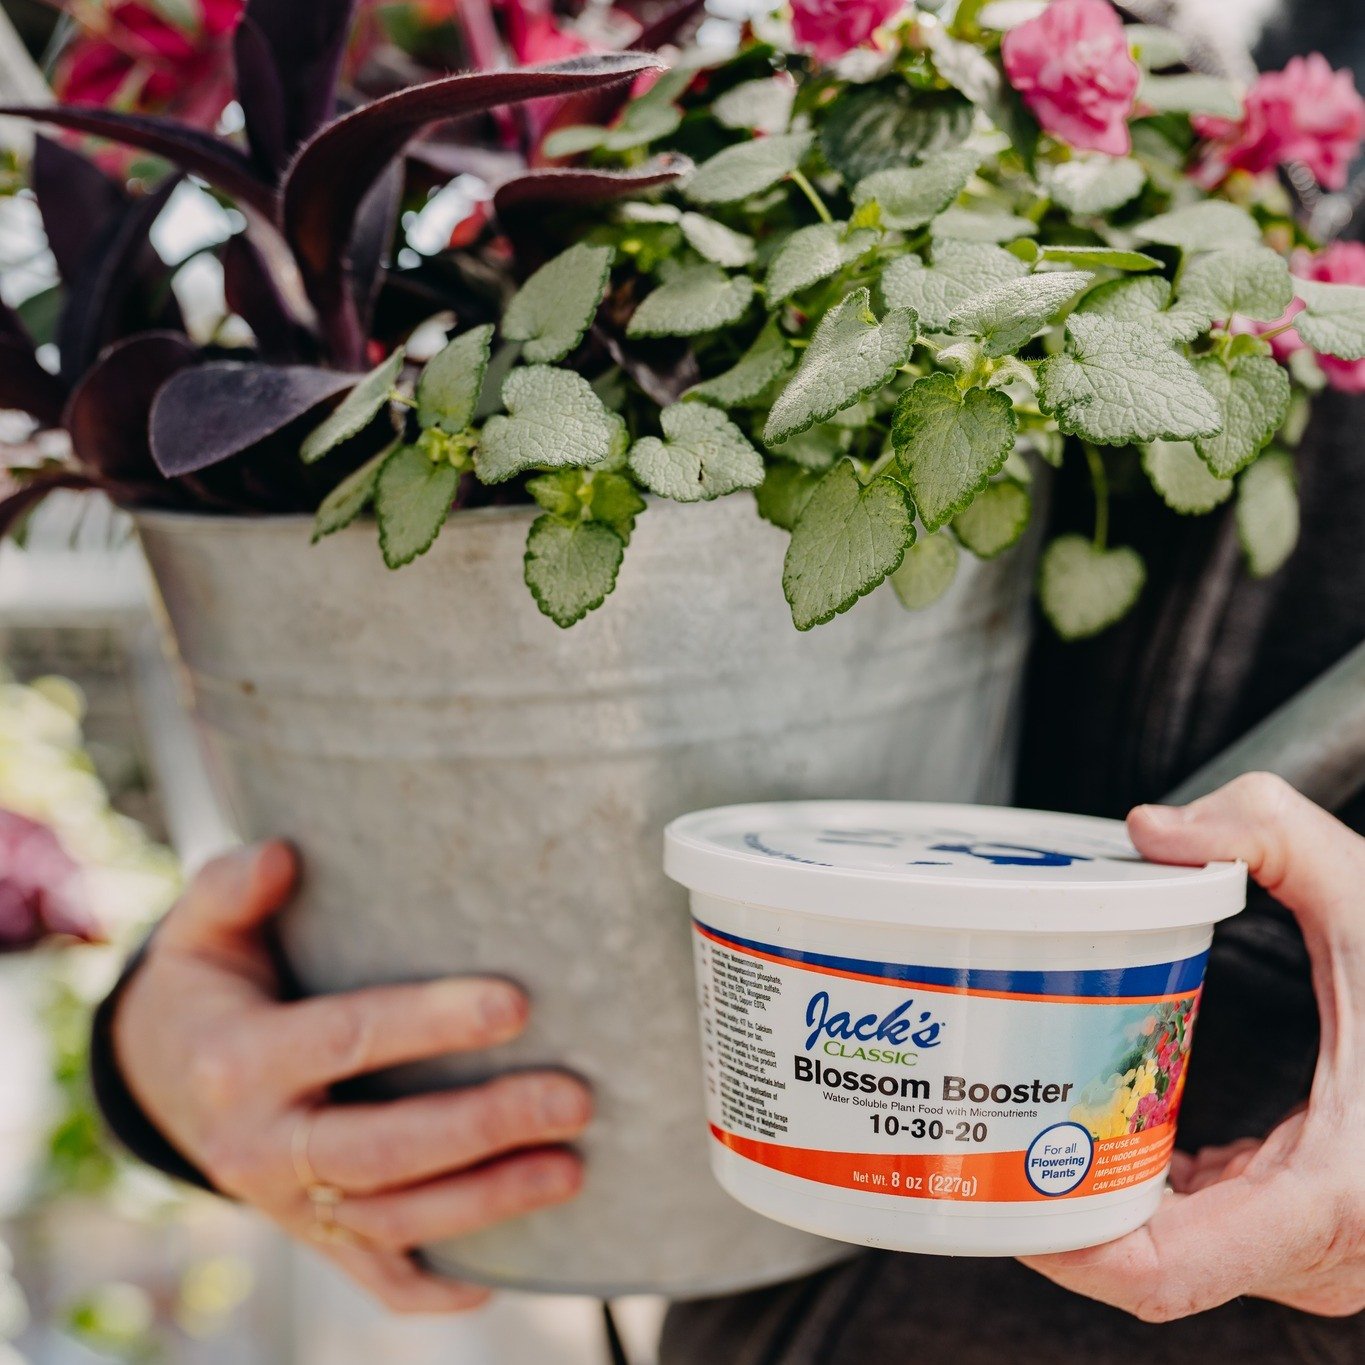 Transform your garden into a vibrant paradise with Blossom Booster 10-30-20! 

🌸🌿 It's the secret to more blooms and brighter colors. Feed your plants from root to leaf for unmatched quality and results!

#jacksblossomblaster #plantcare #downtoeart